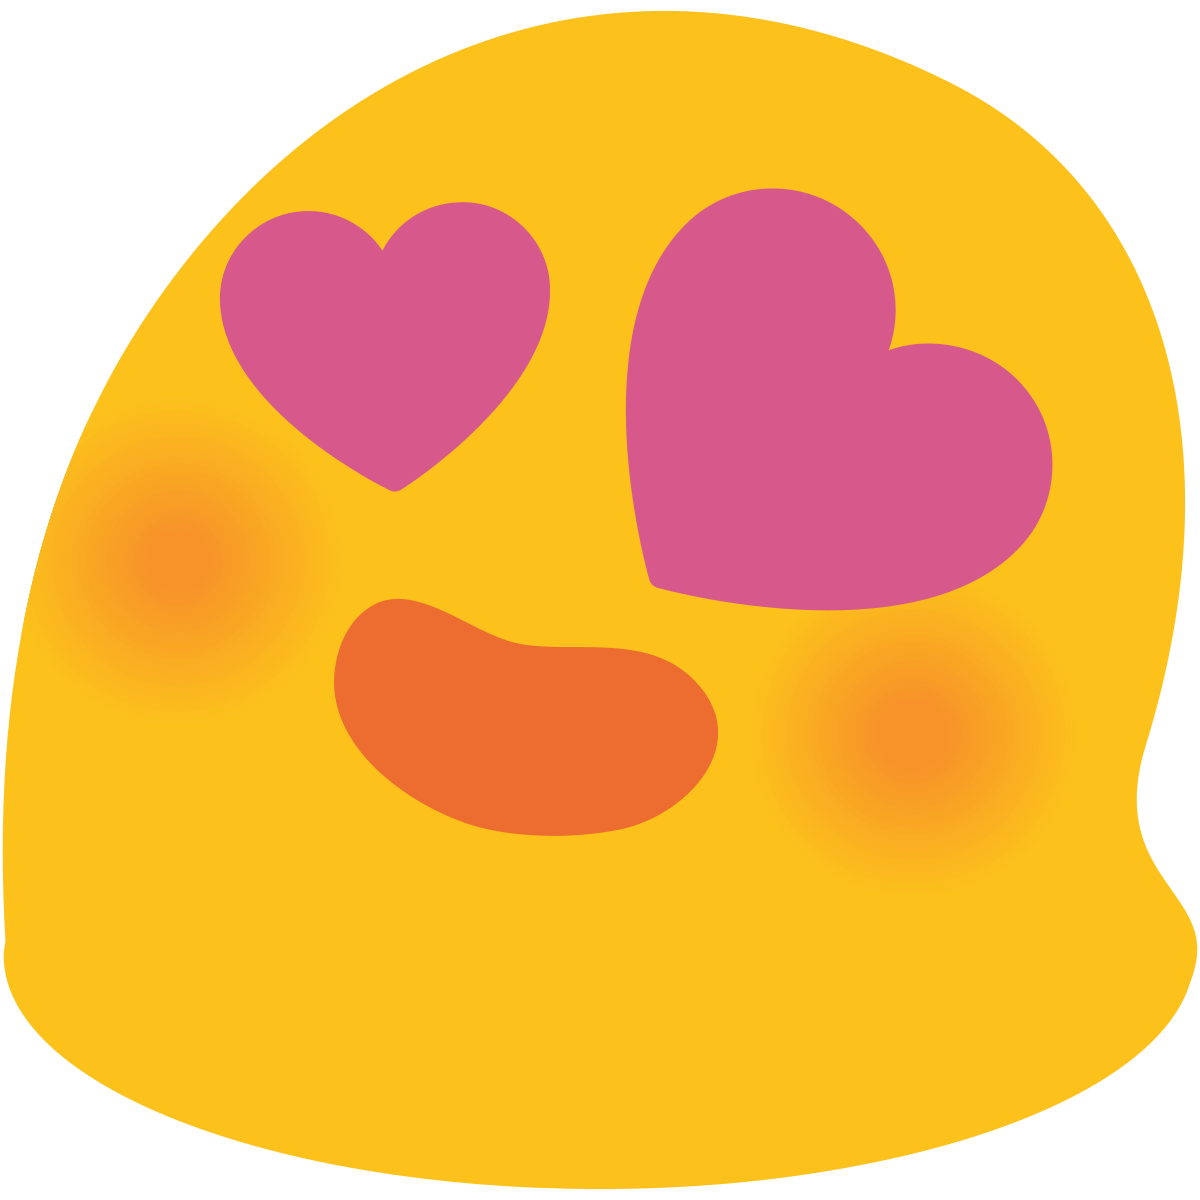 A happy emoji with hearts in the eyes.